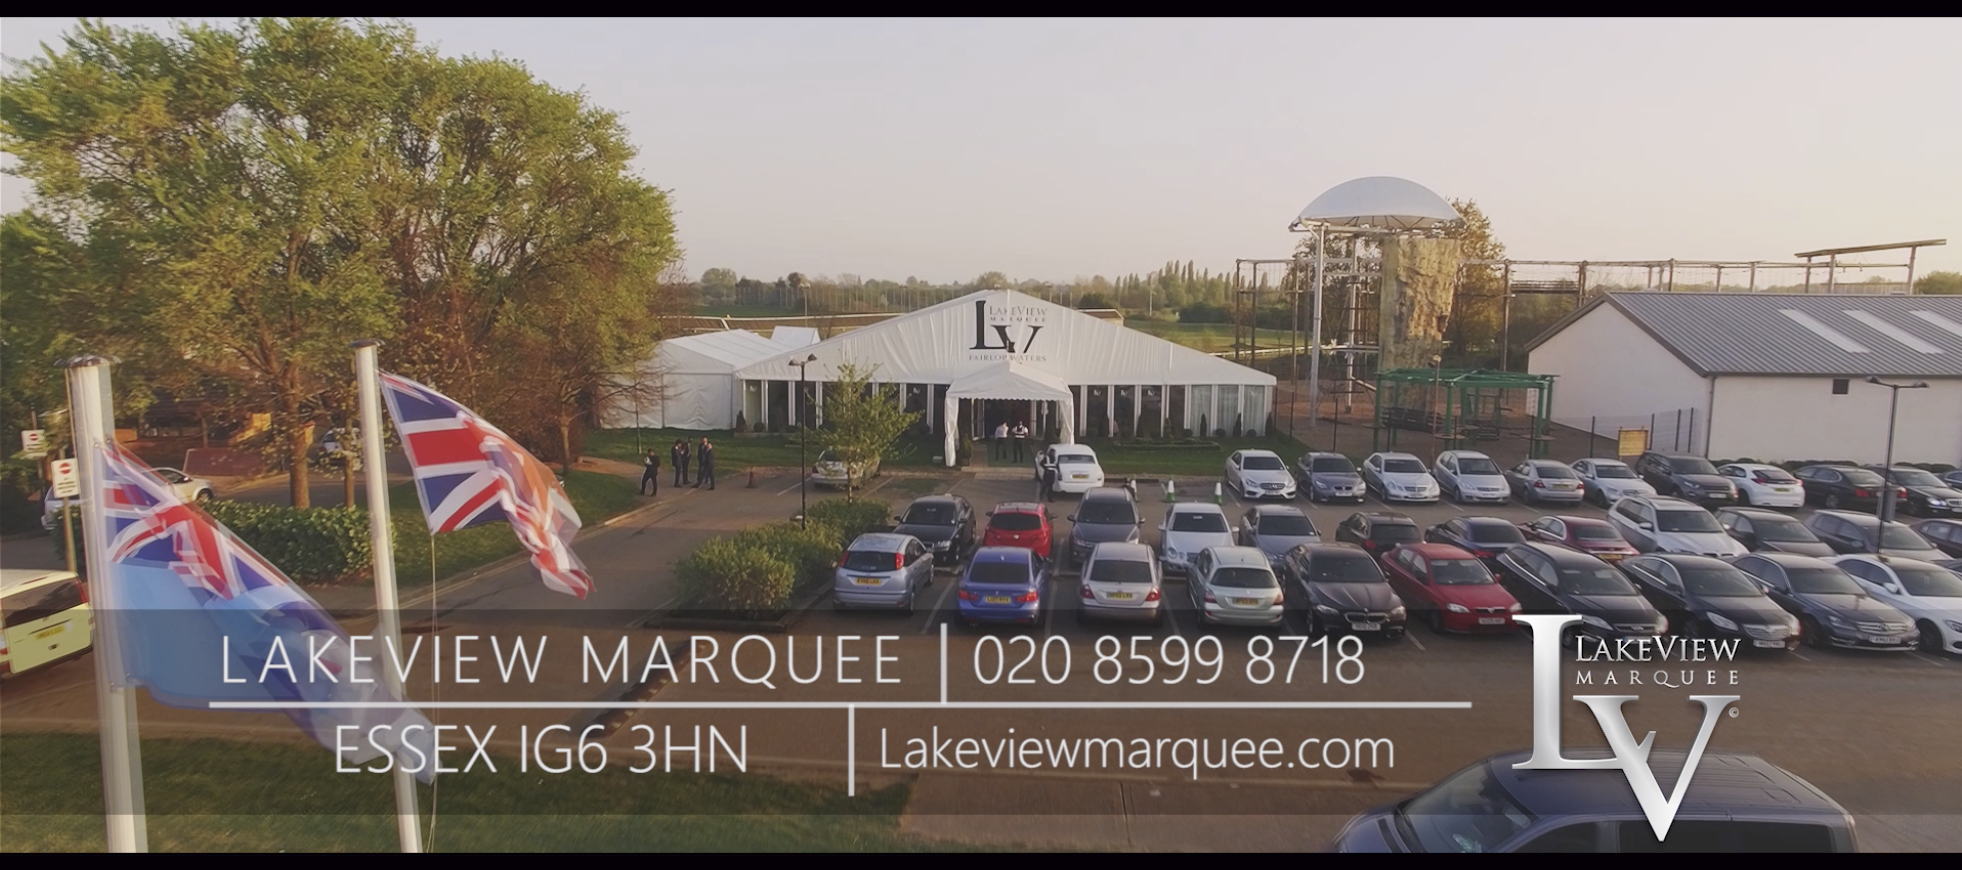 LAKEVIEW MARQUEE | FAIRLOP WATERS COUNTRY PARK